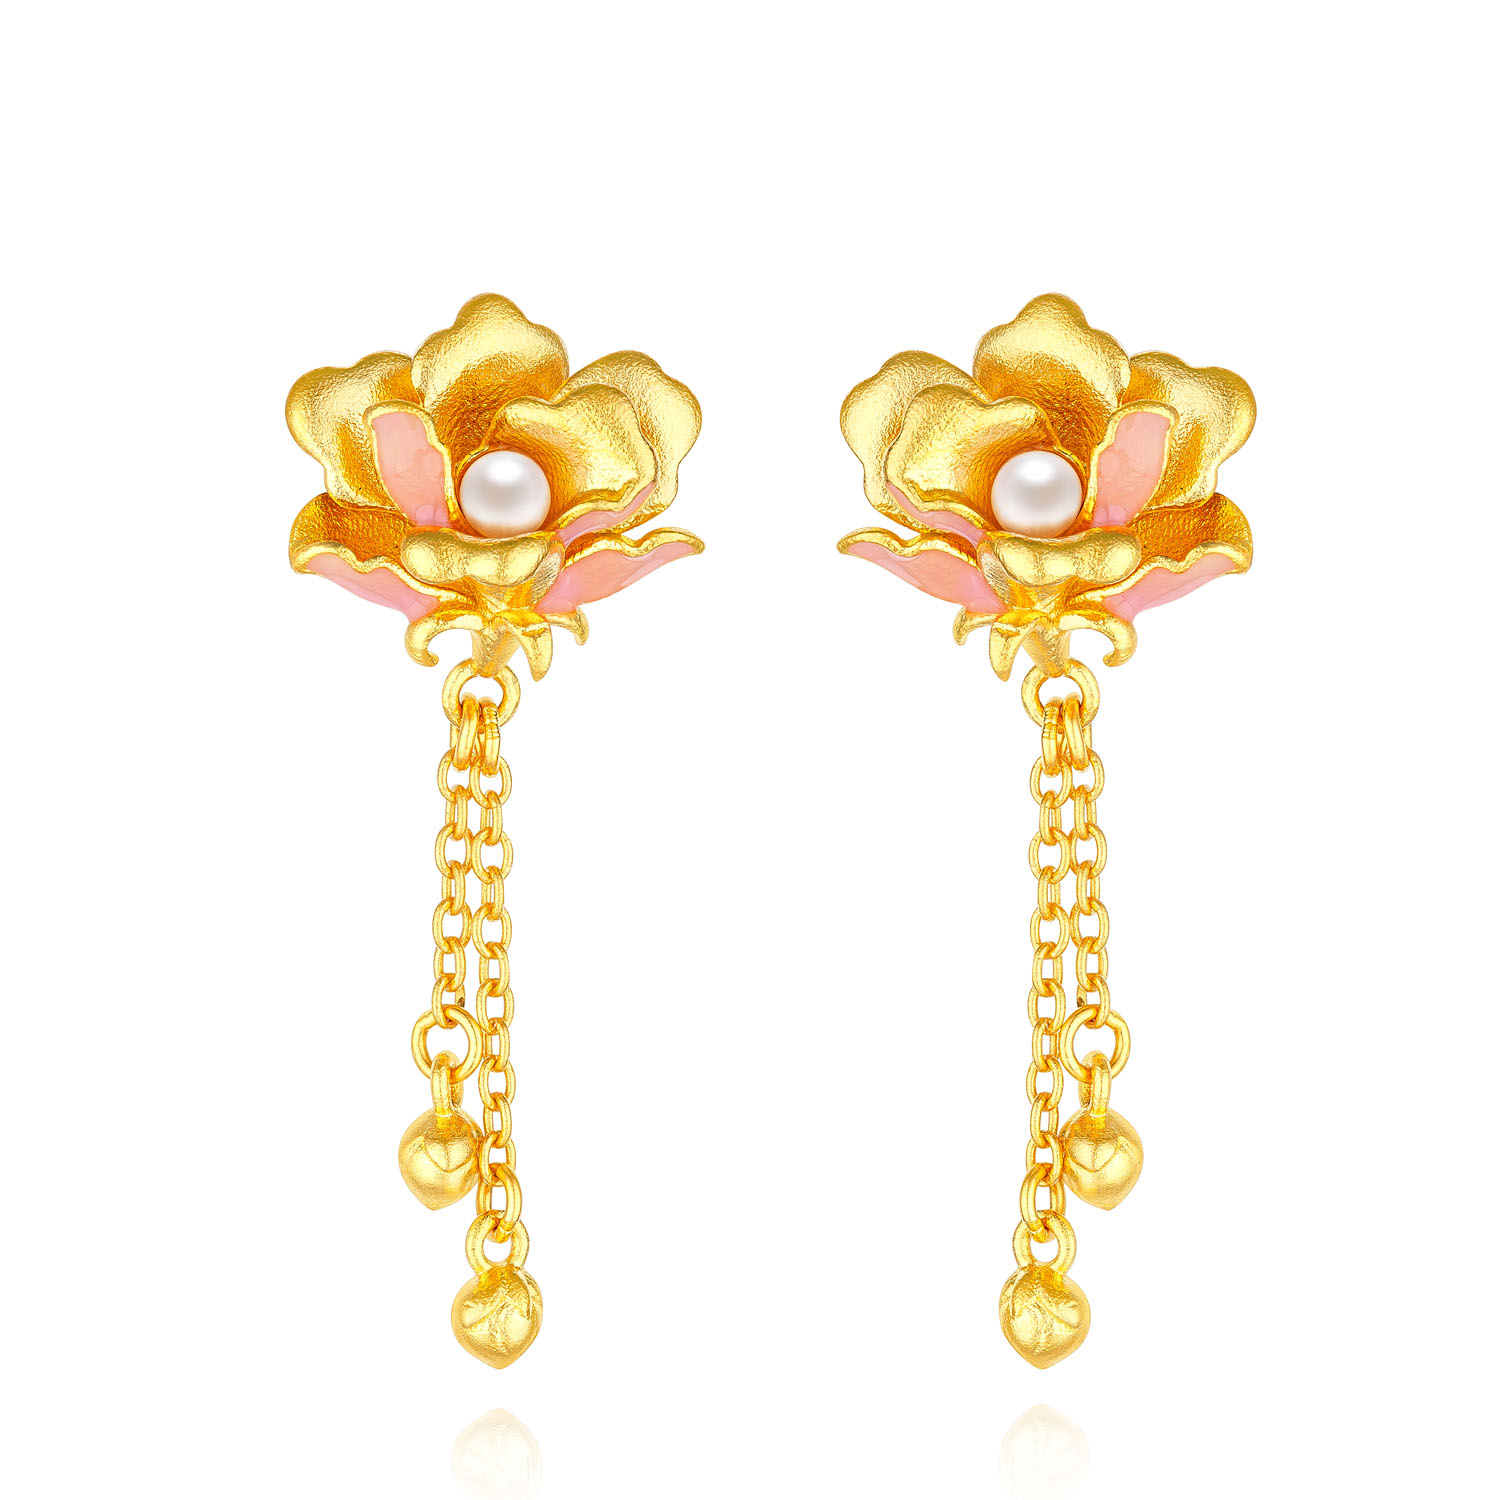 Heirloom Fortune - Charm of Song Dynasty Collection "Lotus Blossom" Gold Pearl Earrings